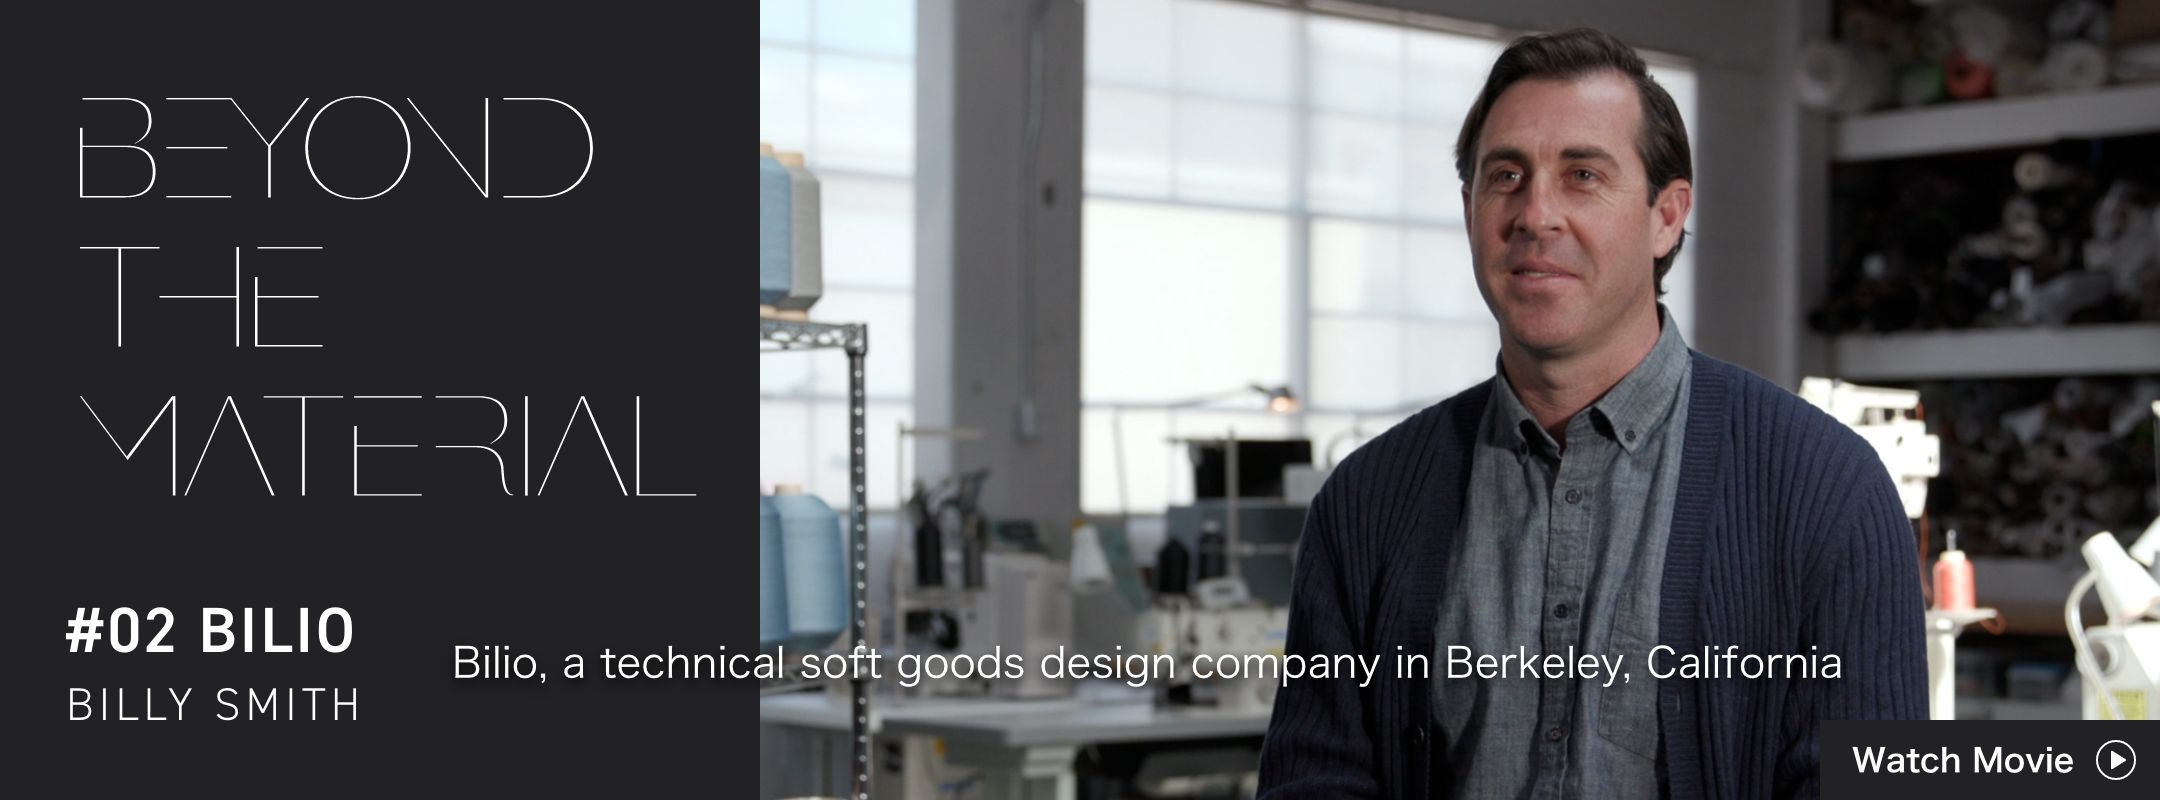 BEYOND THE MATERIAL #02 BILIO BILLY SMITH Bilio, a technical soft goods design company in Berkeley, California